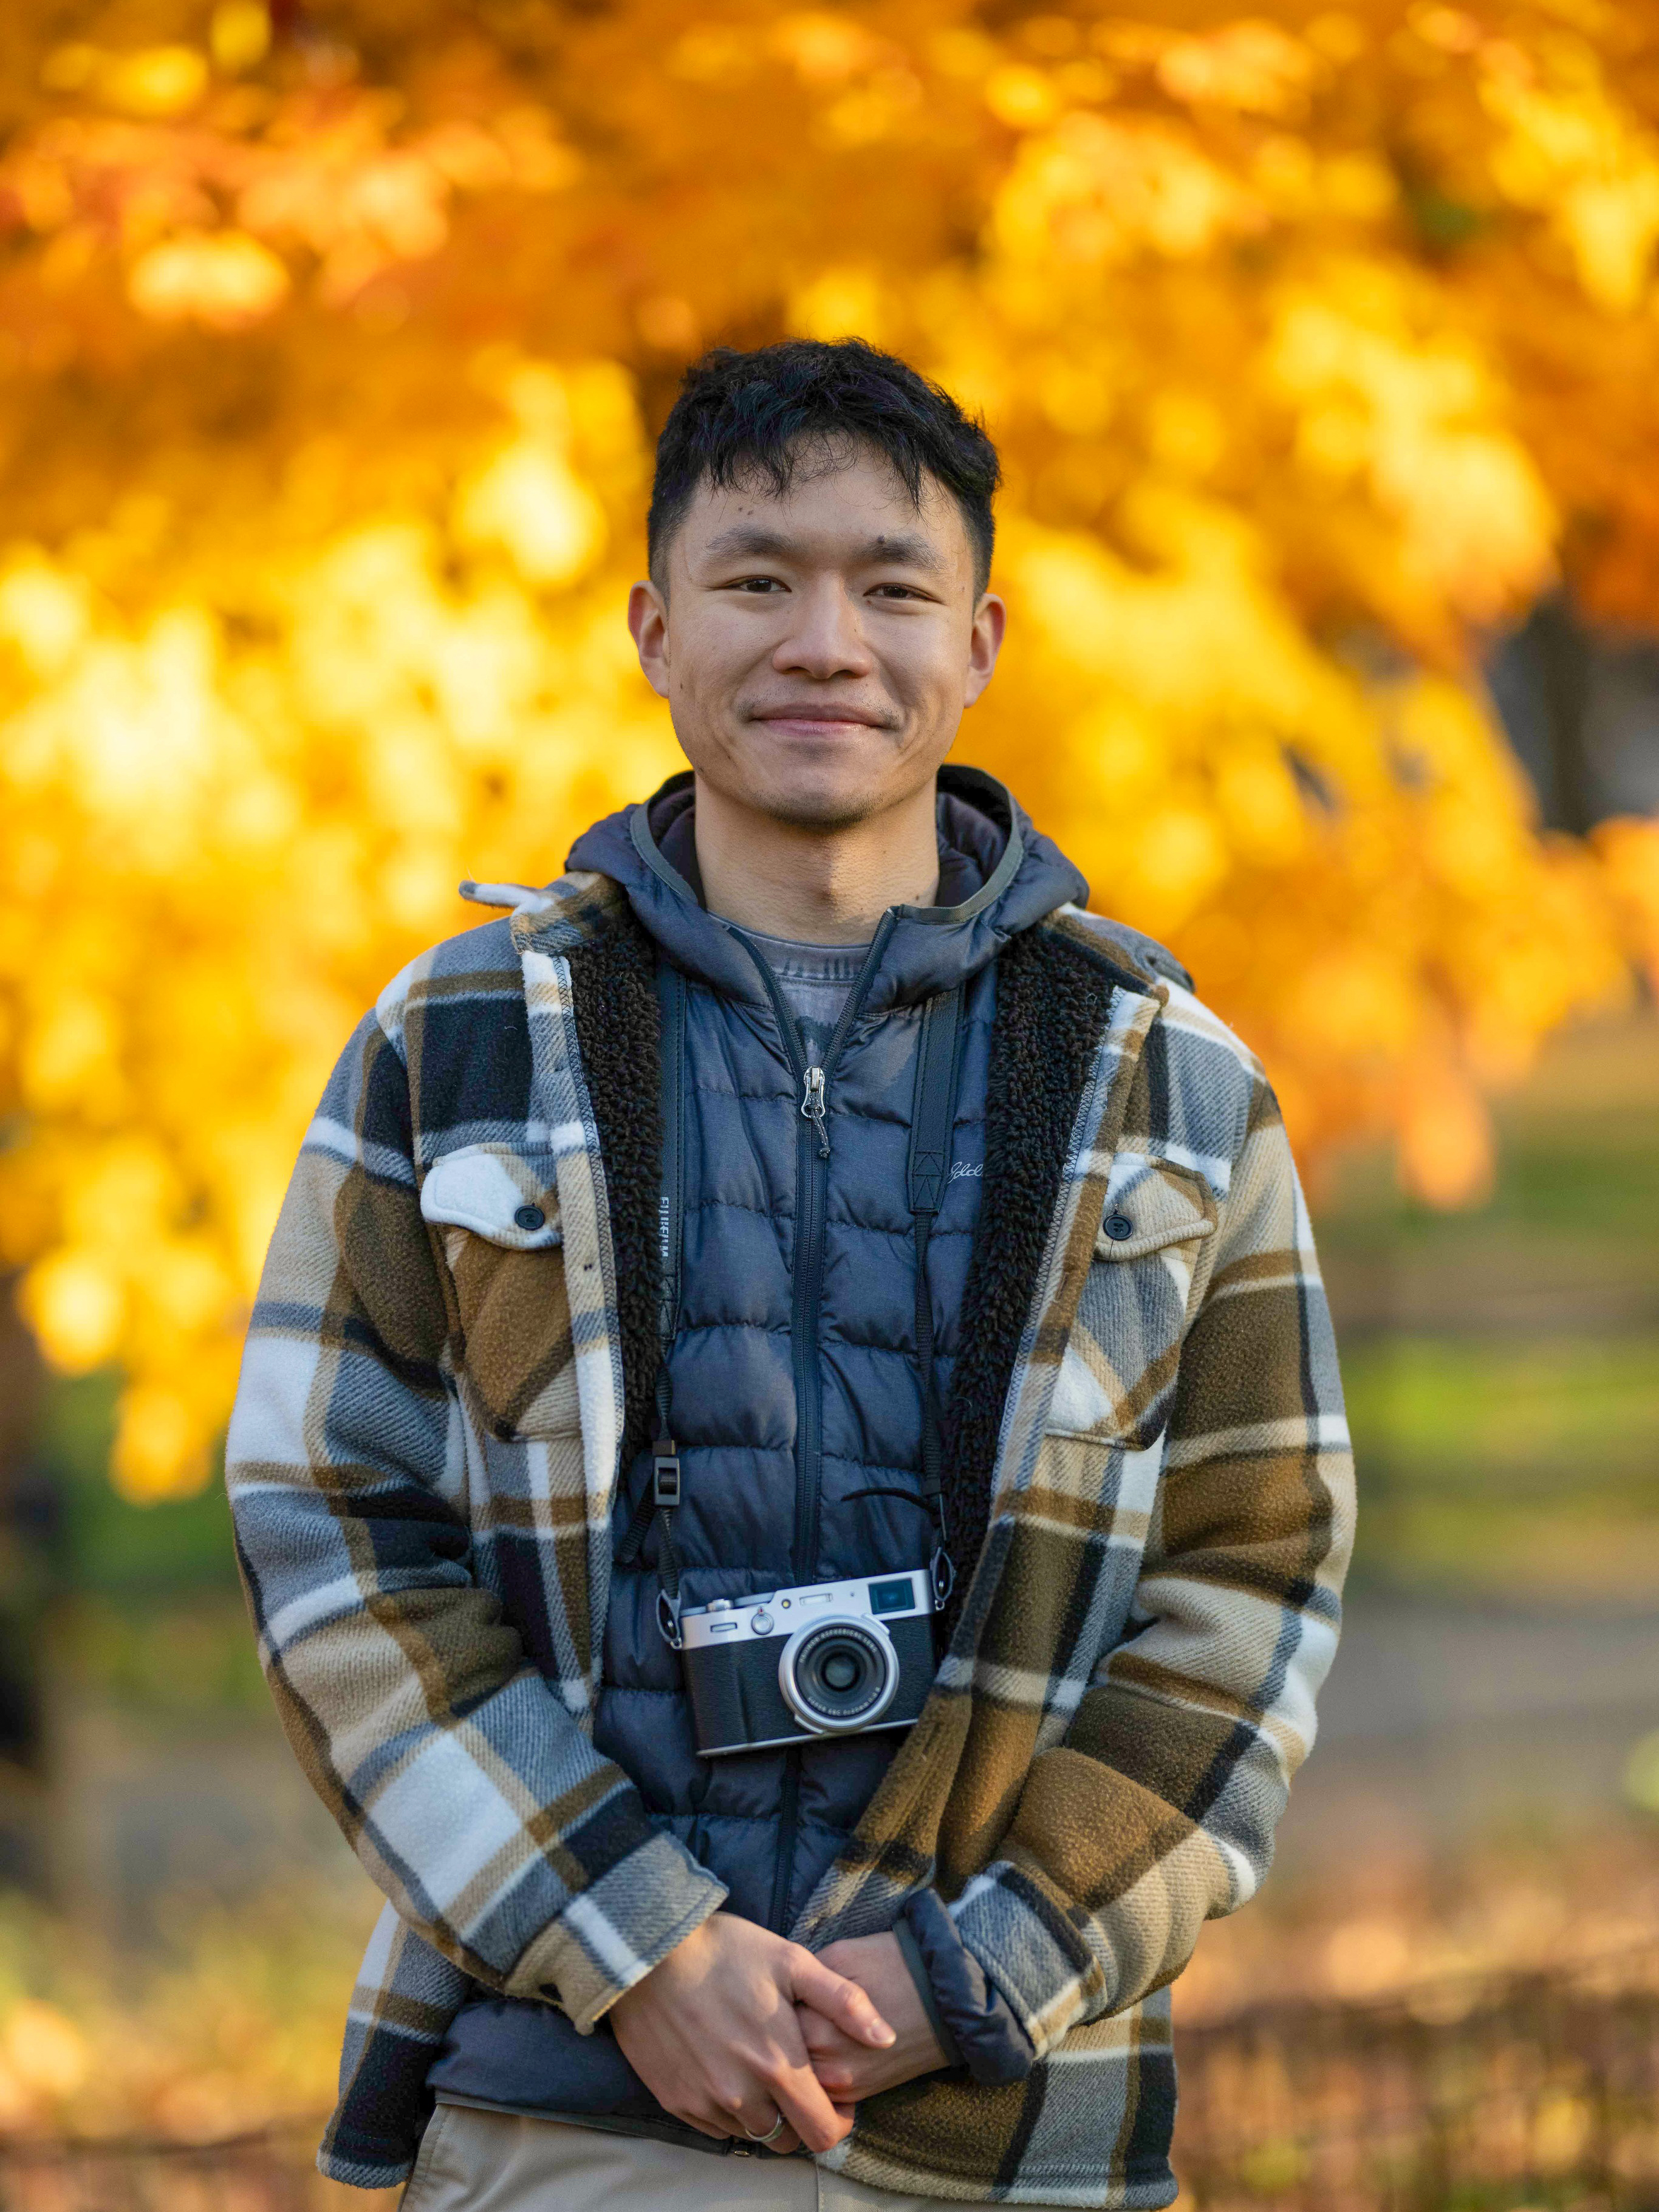 Shaun is a Washington state native and studied Mathematics at the University of Washington. He currently works as a software engineer at a tech company. In his free time he likes to shoots photos and videos of the city, playing board games and going to shows.